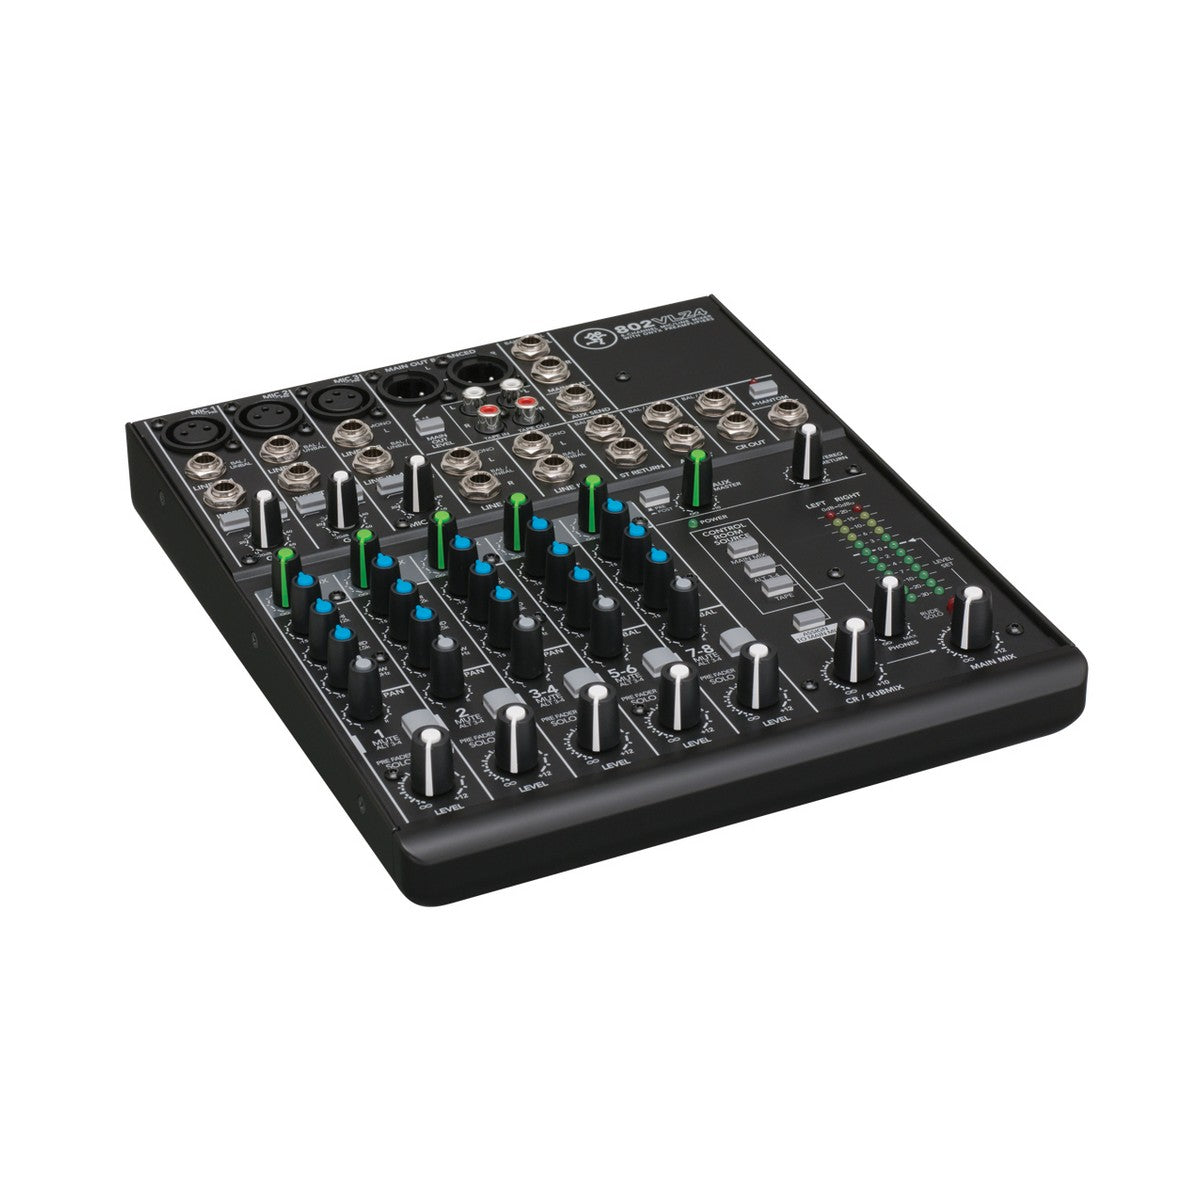 Mackie 802VLZ4 8-Channel Compact Analog Mixer with 3 Onyx preamps